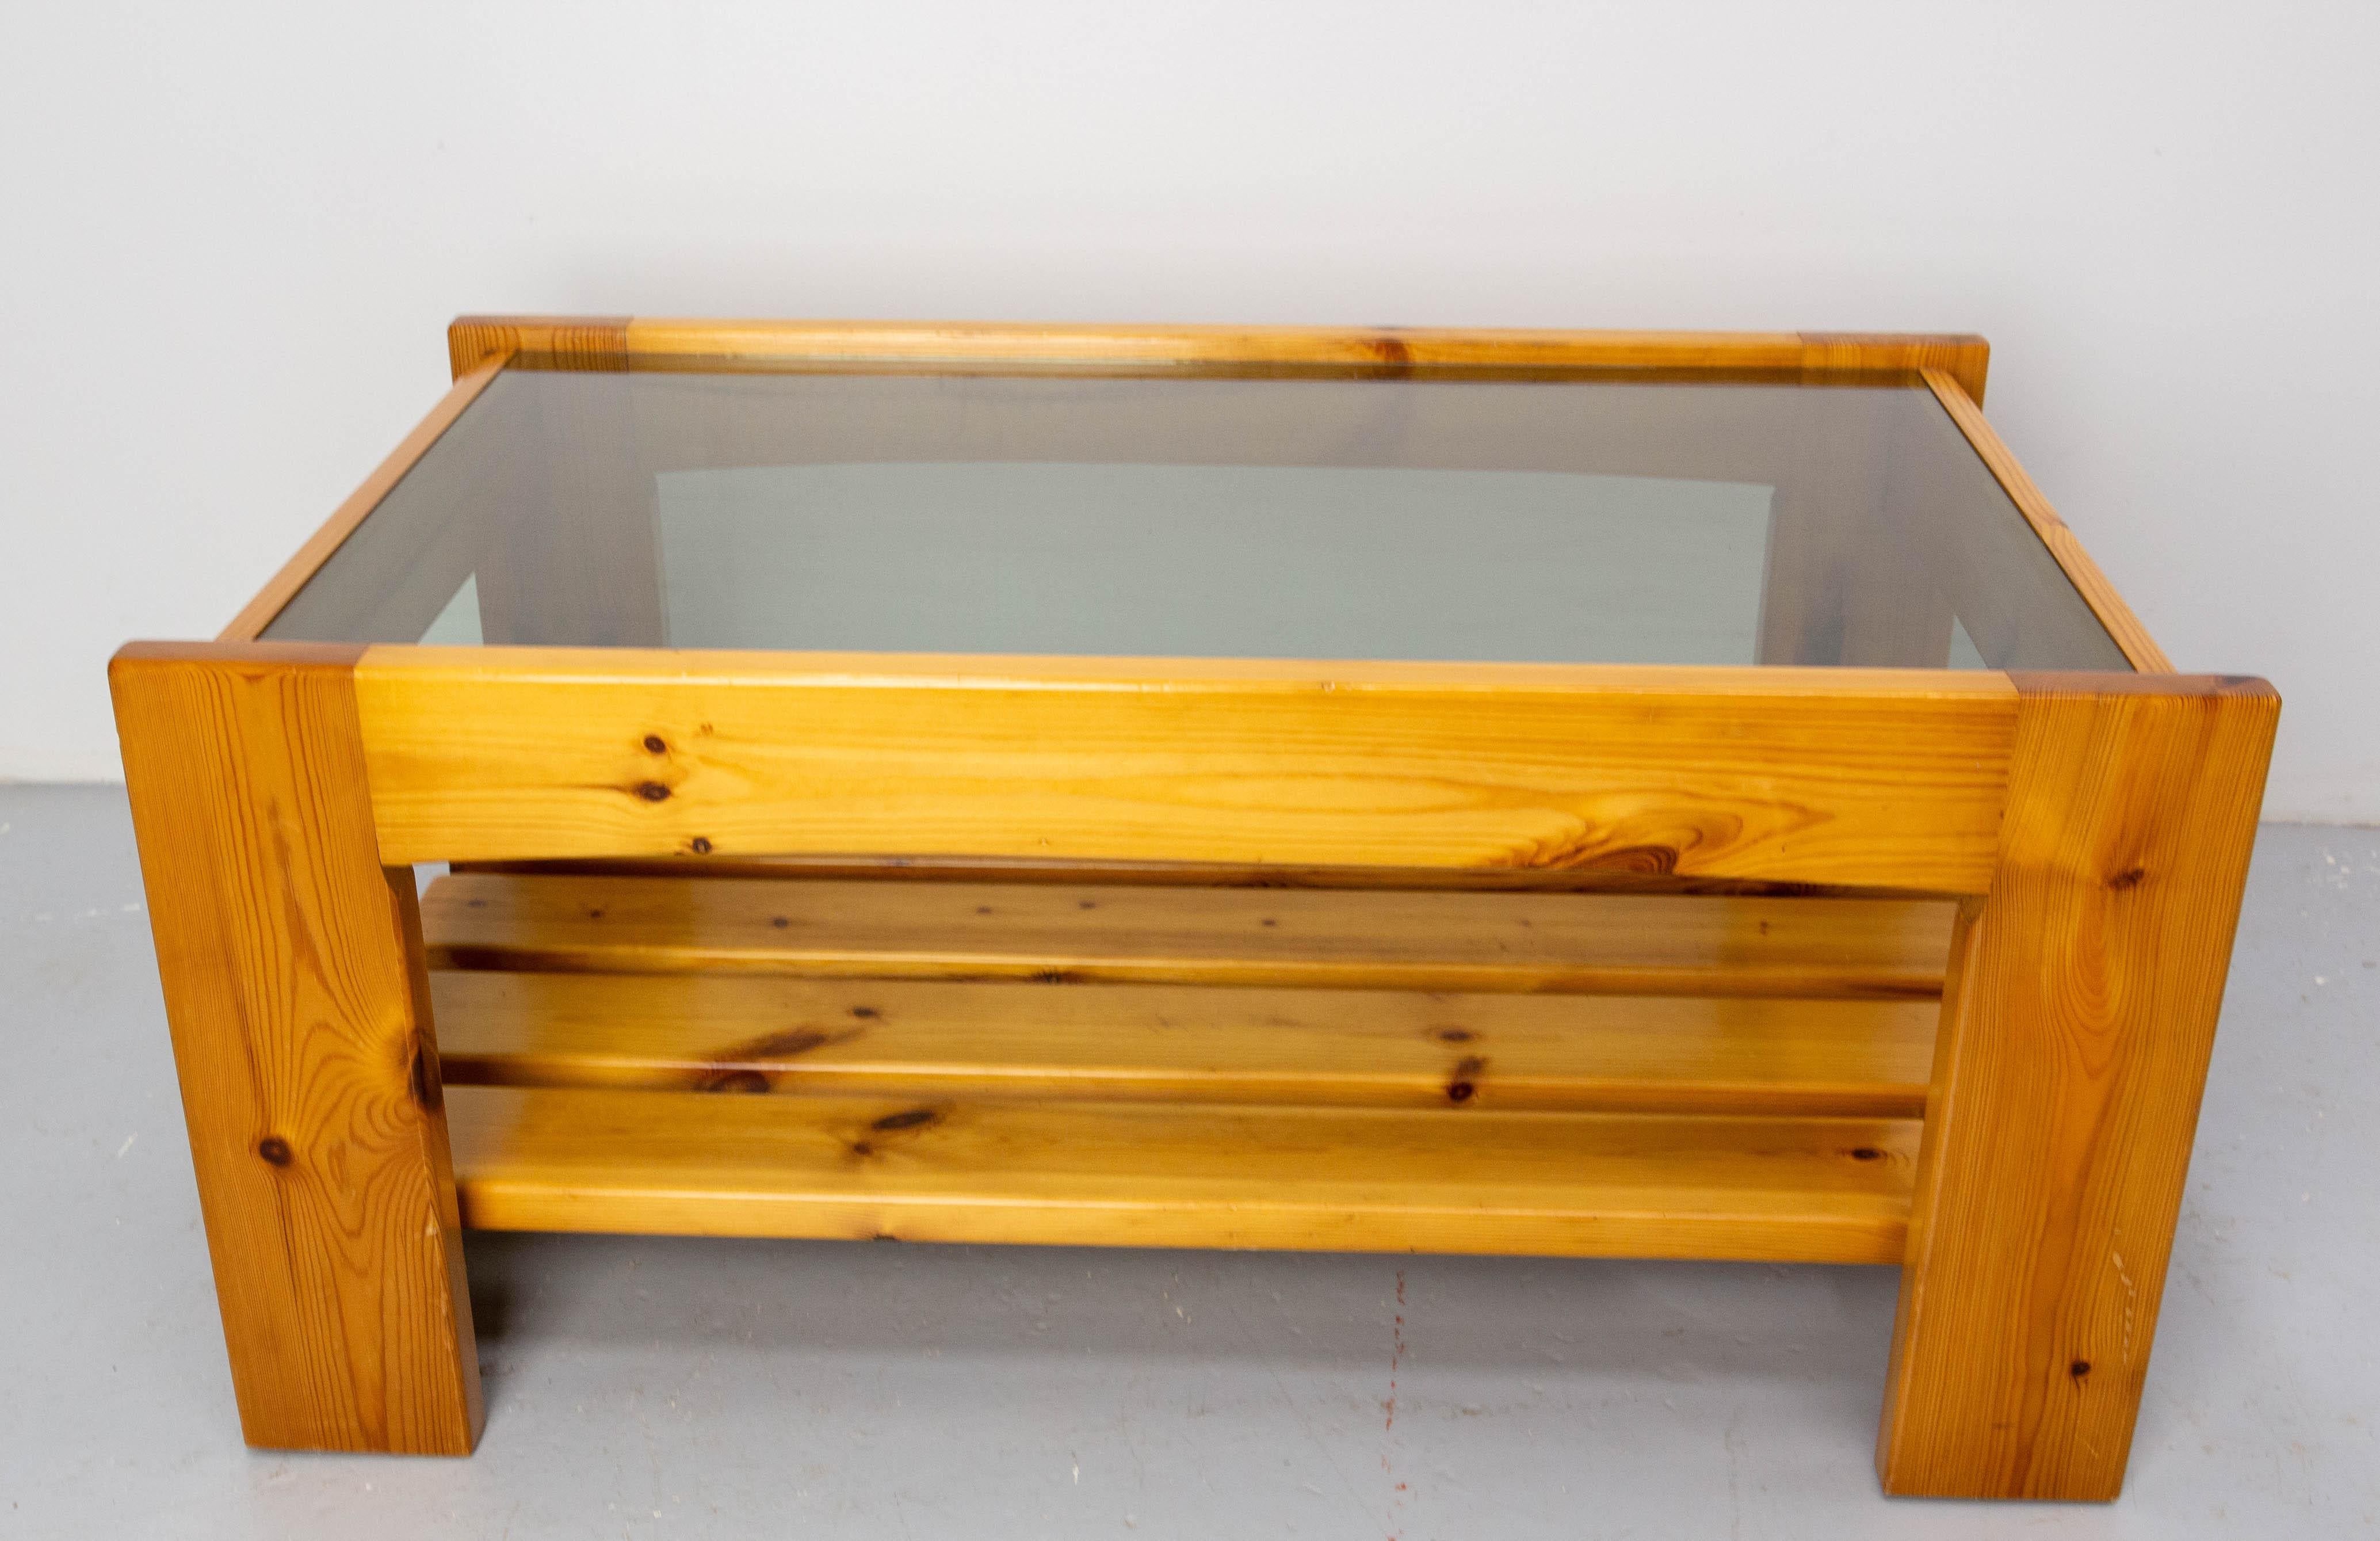 French coffee table with glass top and pine.
This design is typical of the 1980's.
In good condition

Shipping:
L 88 P 55.5 H 40.5 cm 15.5 Kg.